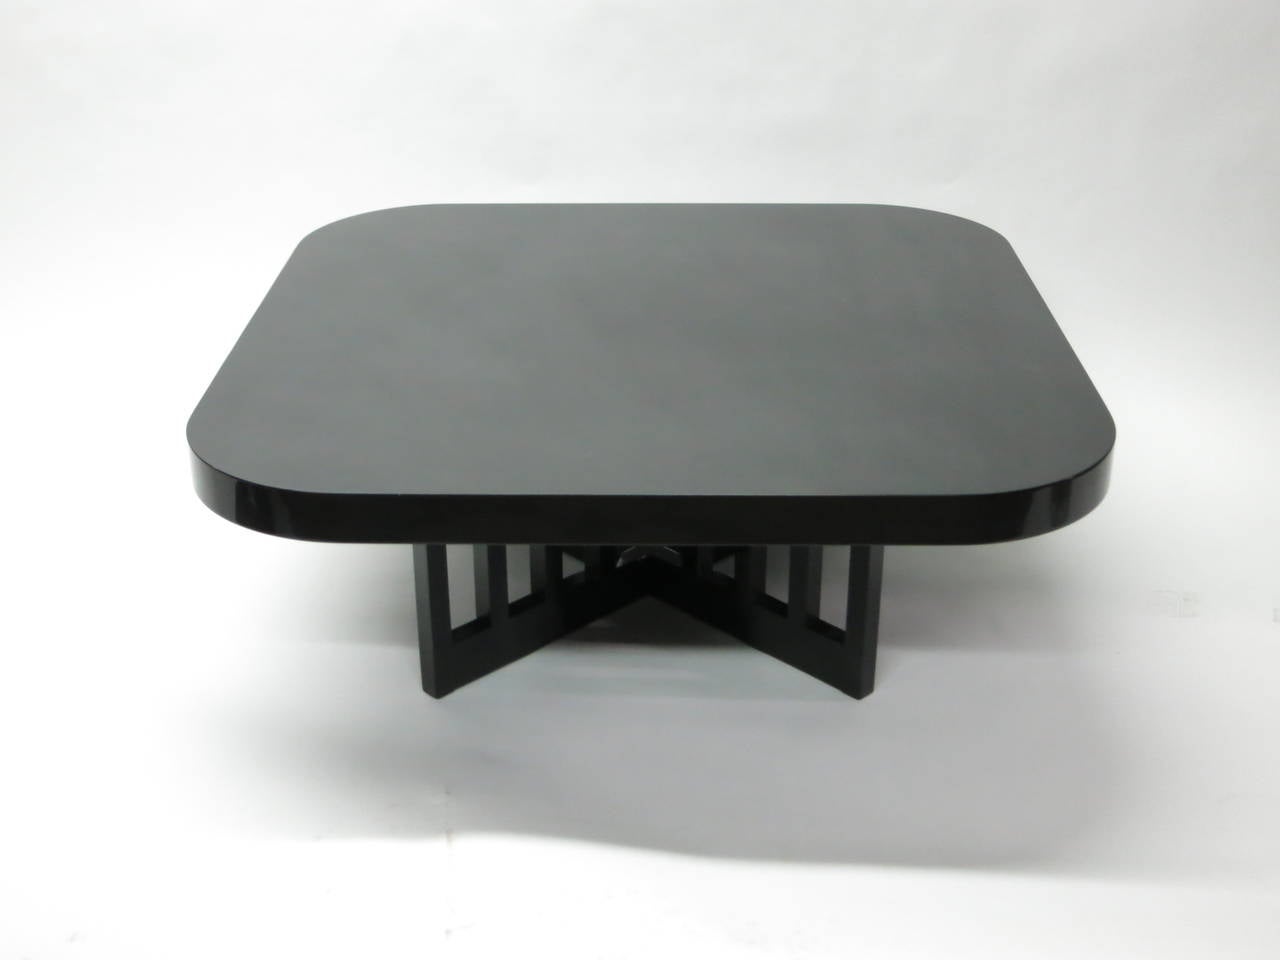 Coffee table with a 2 1/4 inch square top with rounded corners an X-shaped slatted base all in black lacquered wood designed Richard Meier for Knoll International in 1982. 